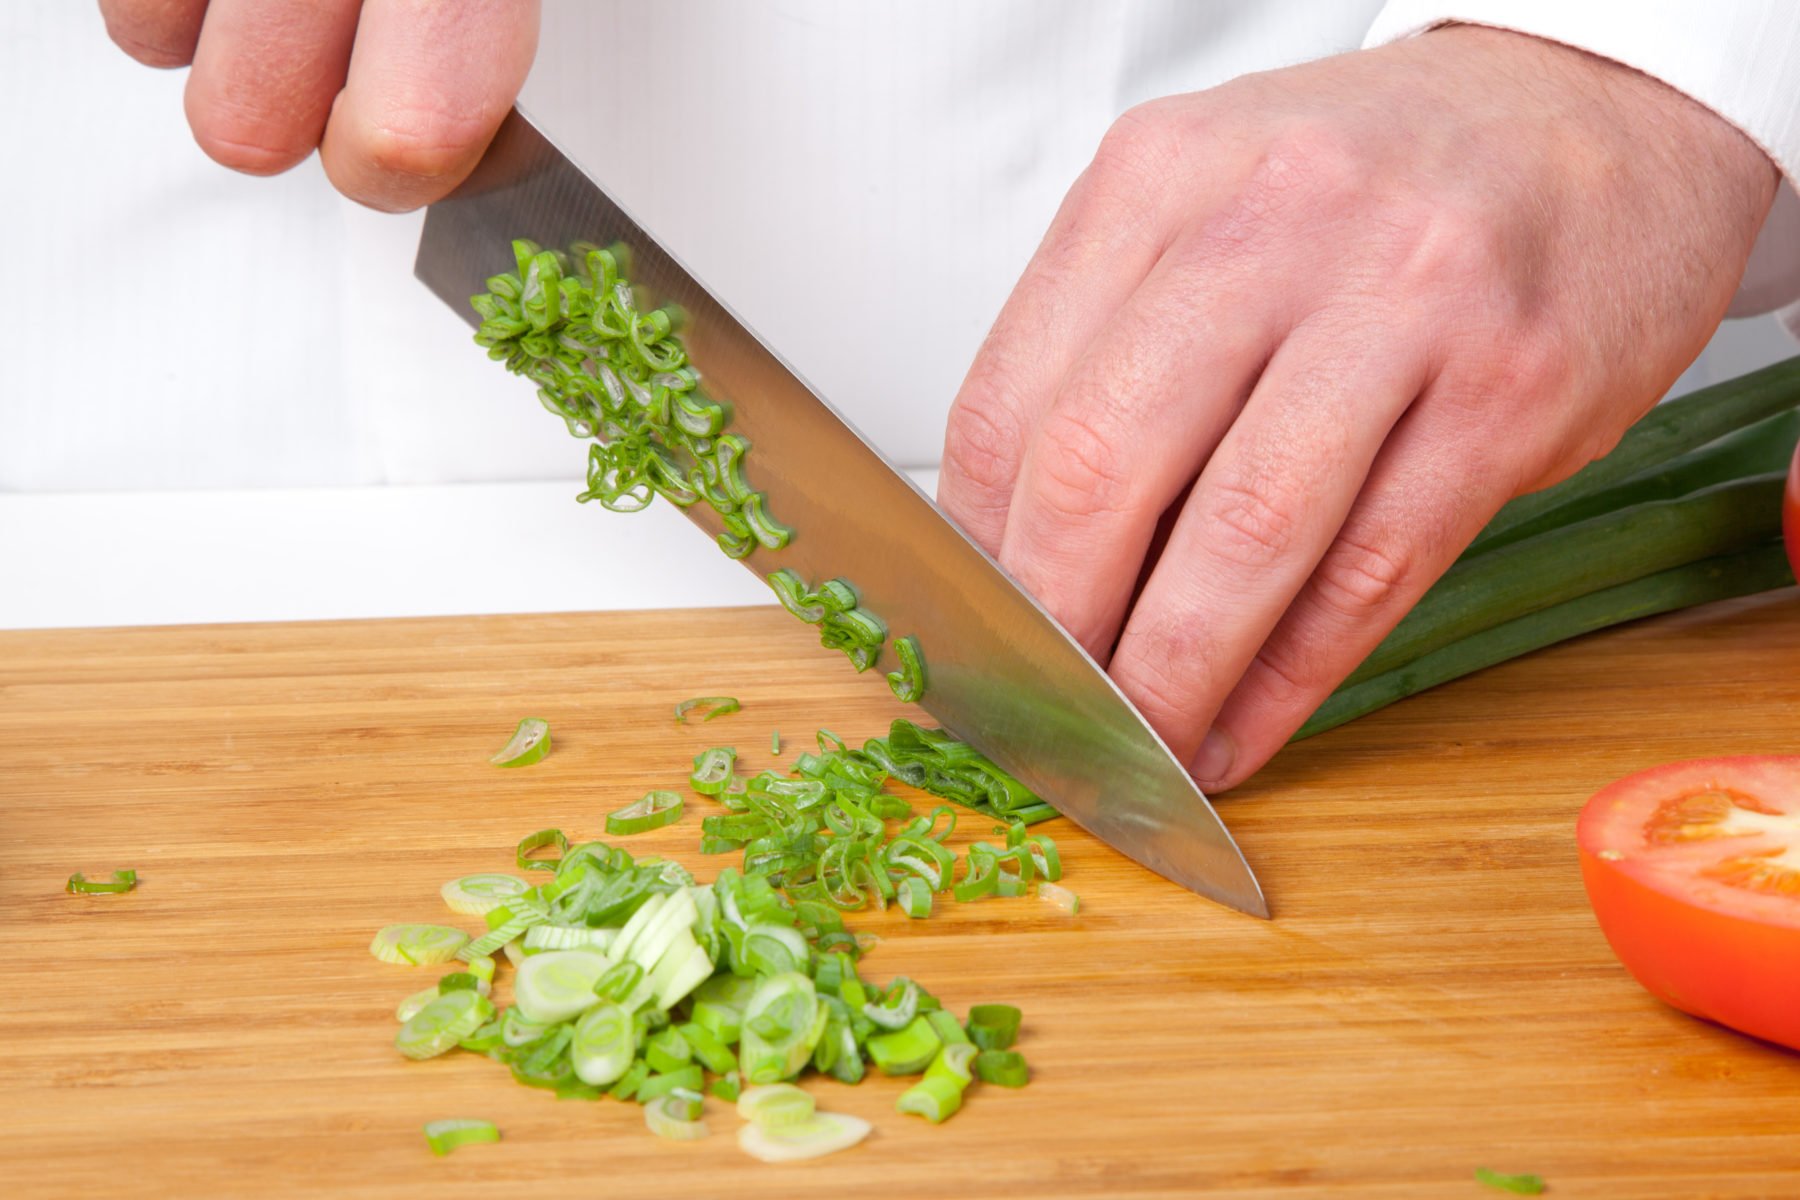 Chef slicing scallions on wooden cutting board